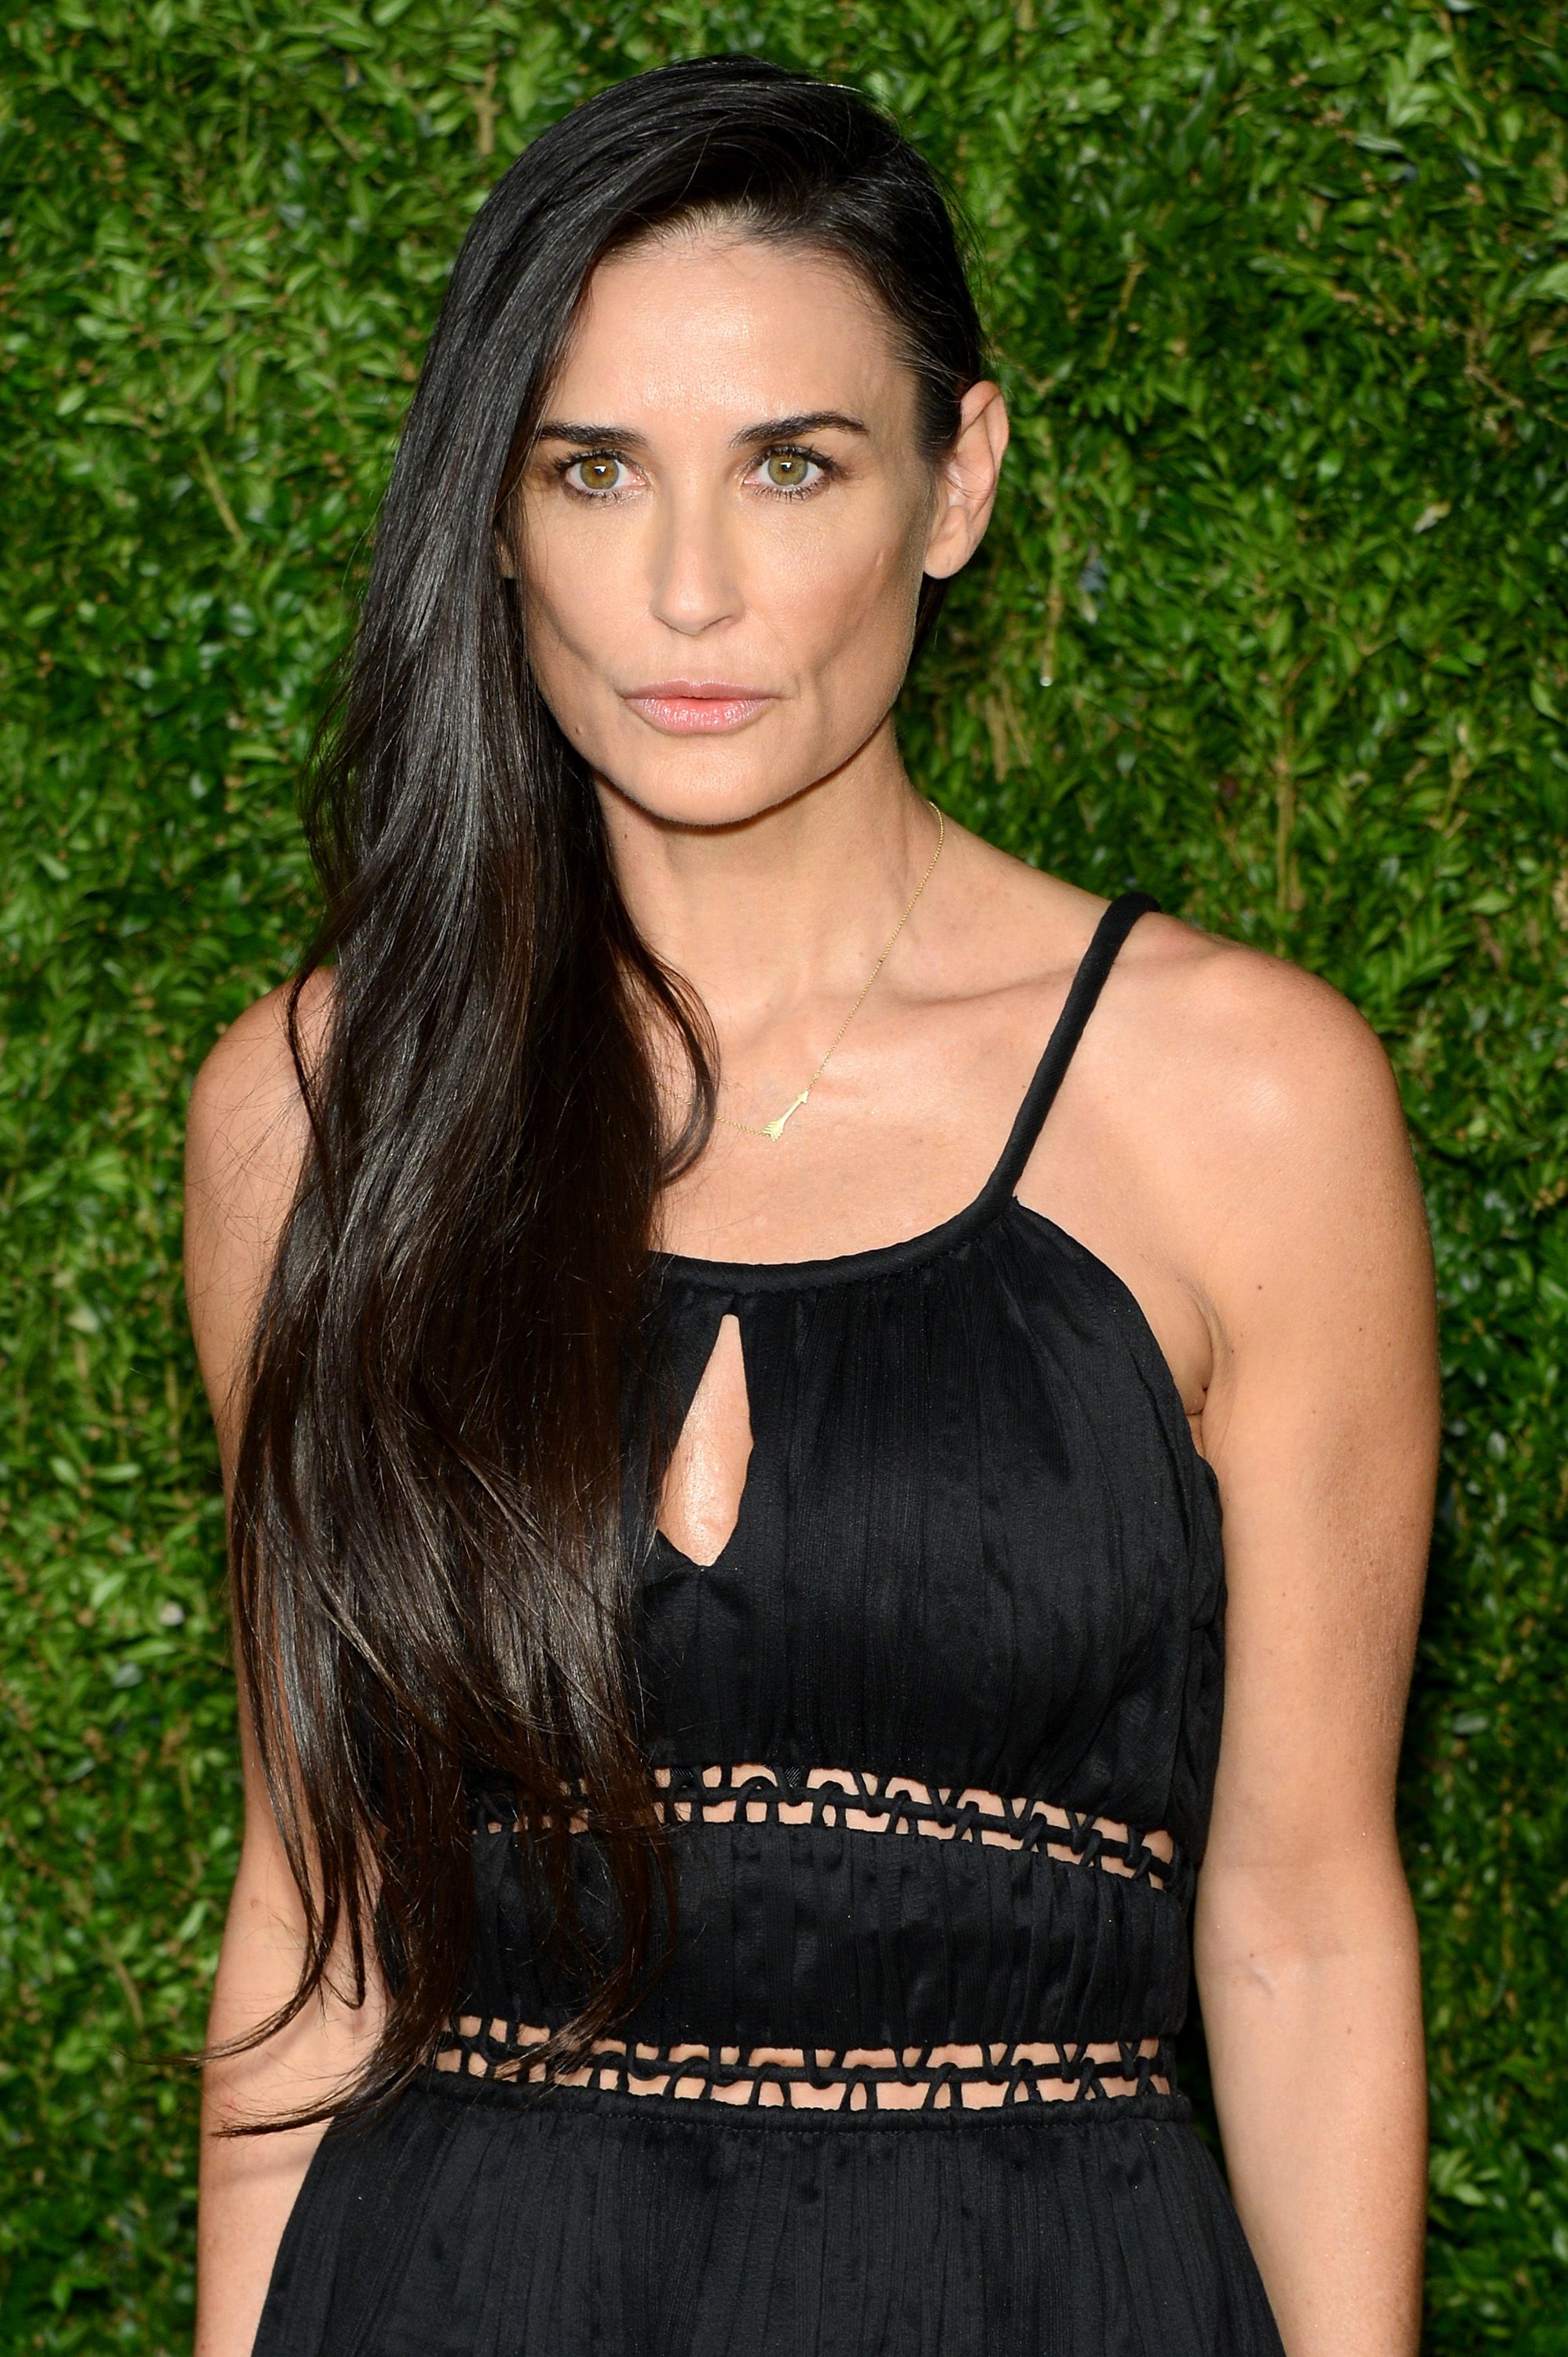 Demi Moore Porn - Demi Moore Says Exercise 'Obsession' Began With 'A Few Good Men'